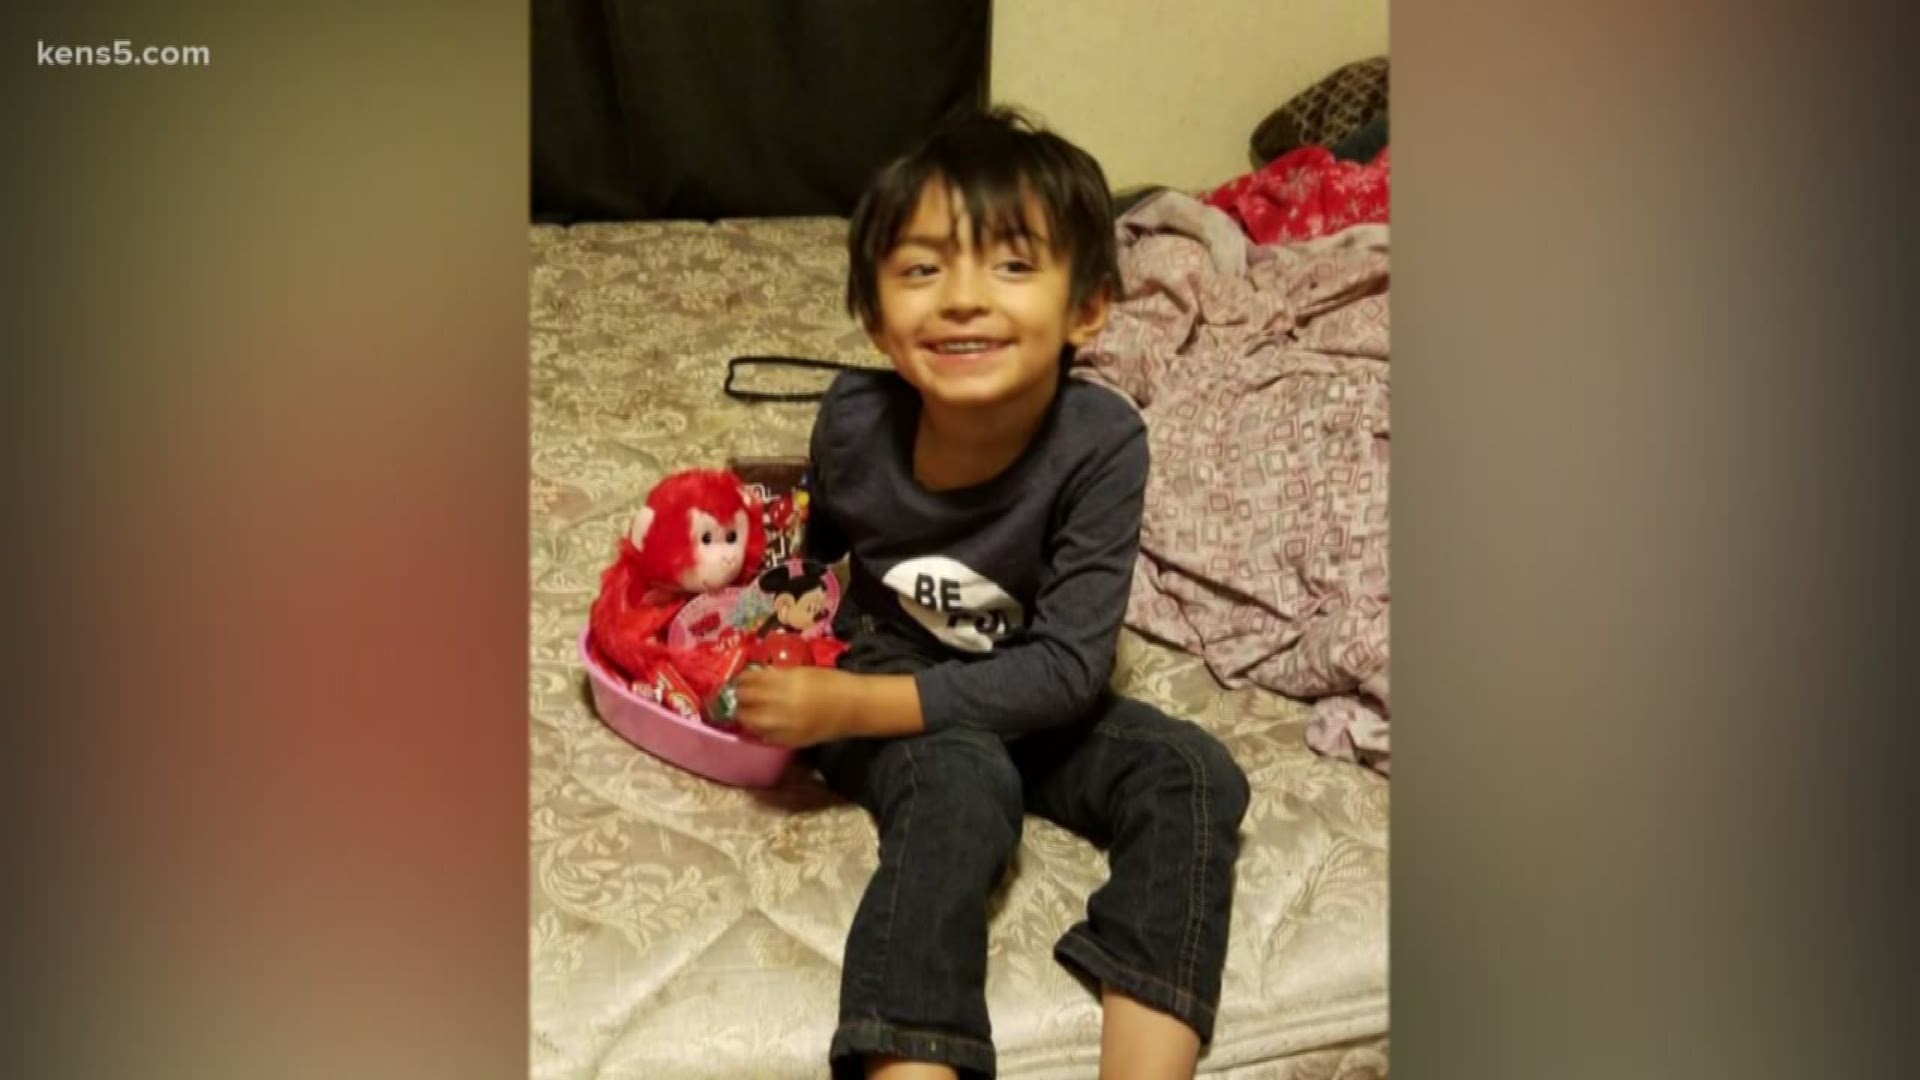 It's all too often a deadly combination.... a pit bull, an innocent child and a lack of supervision. Tonight, a converse family mourns the loss their four year old son. Eyewitness News reporter Adi Guajardo has more.